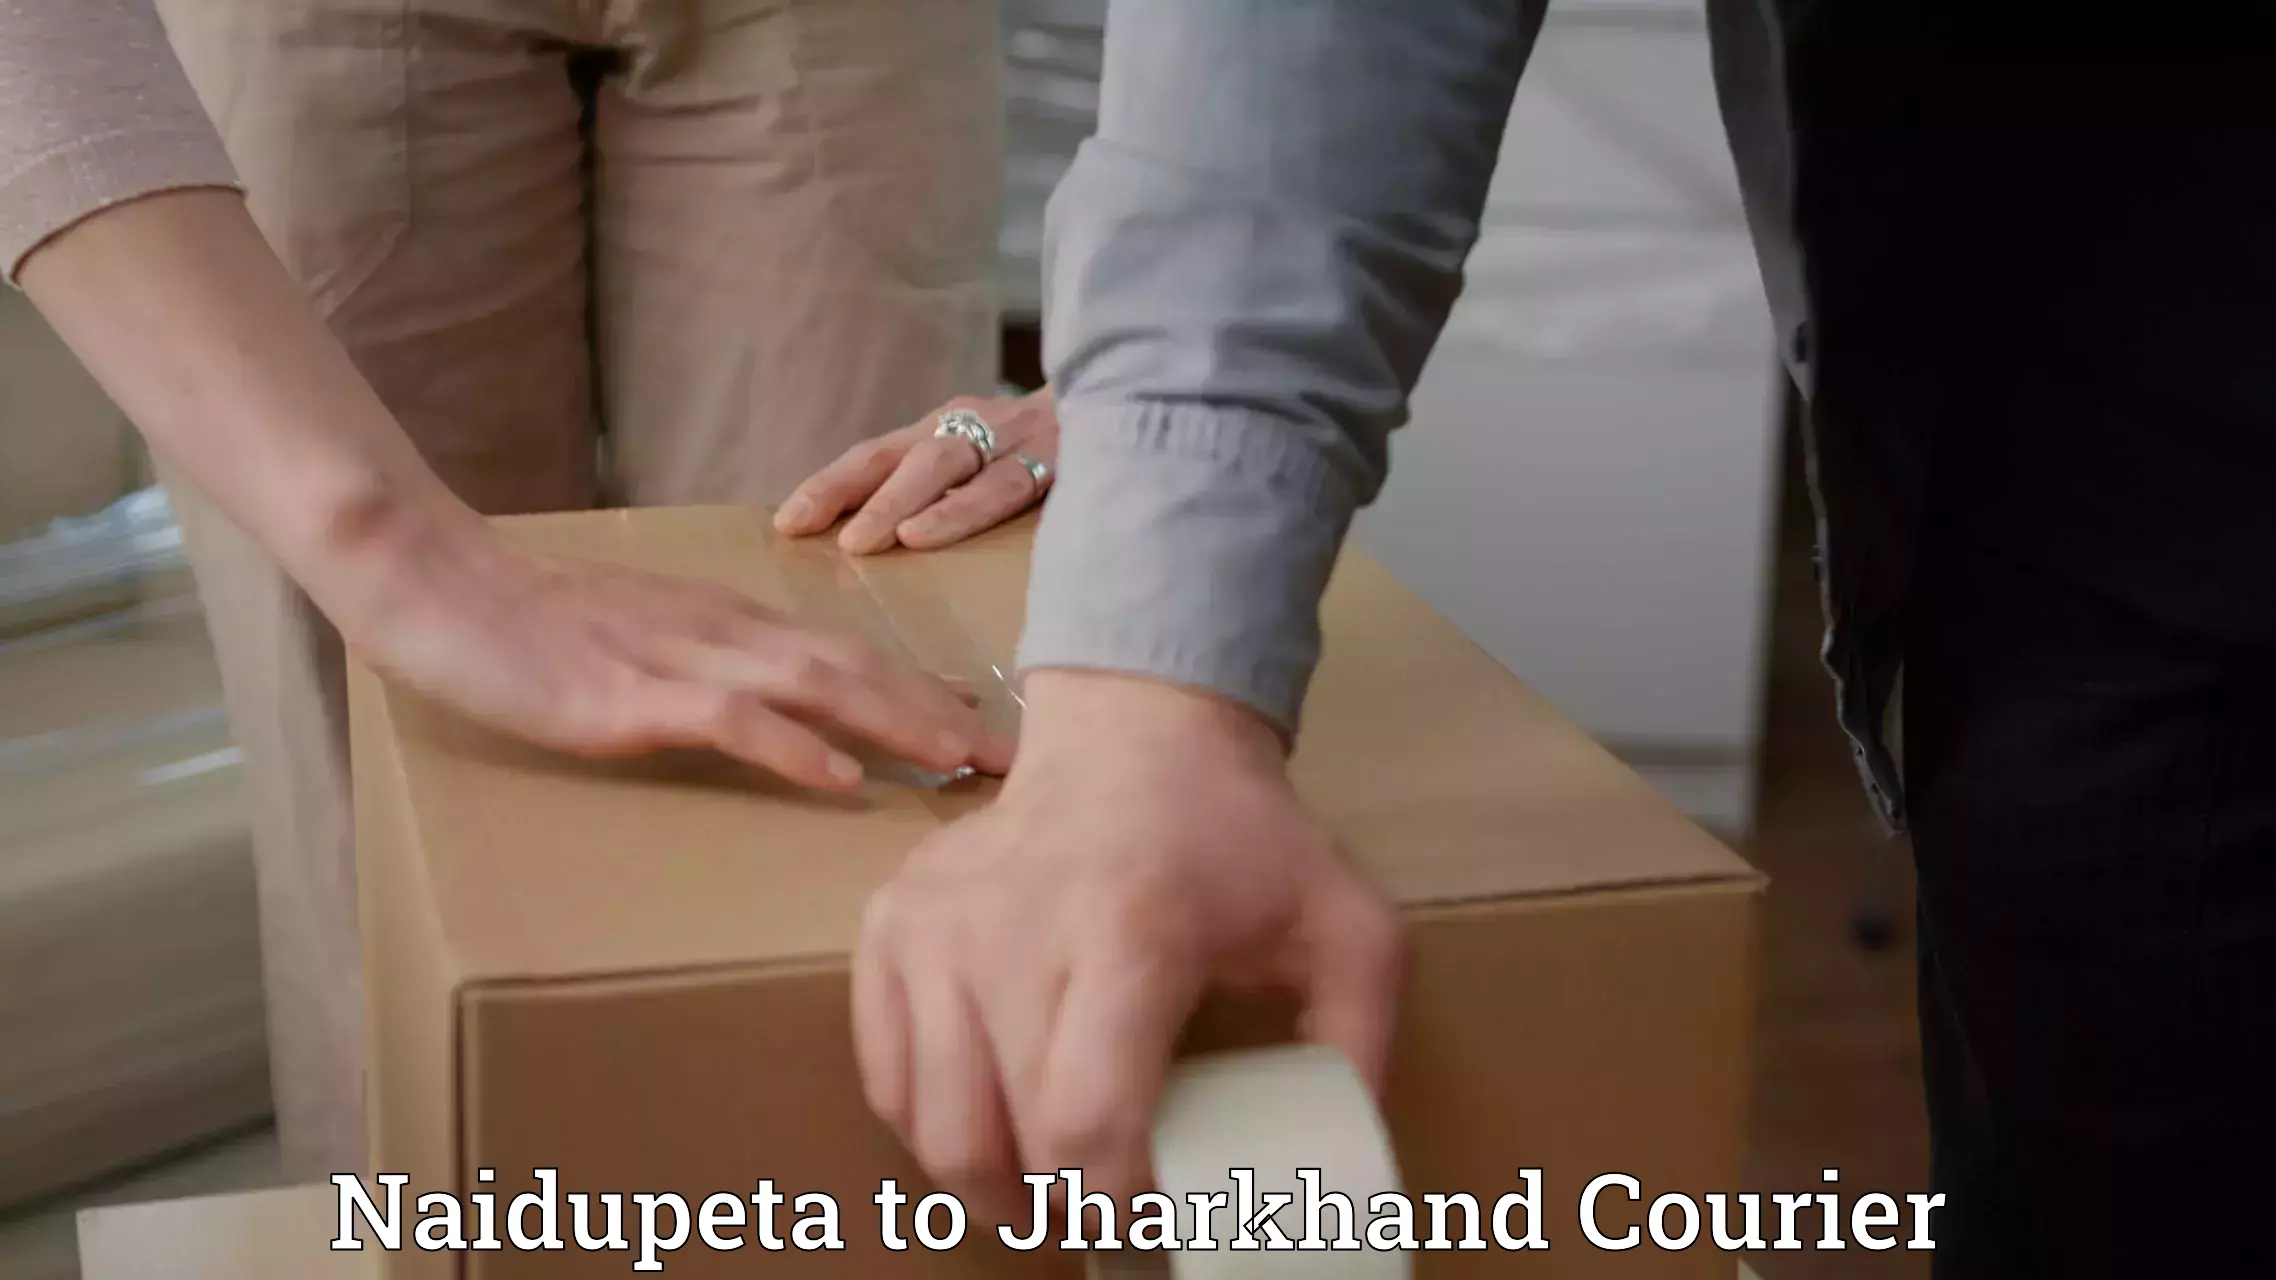 Courier service partnerships Naidupeta to Chandil